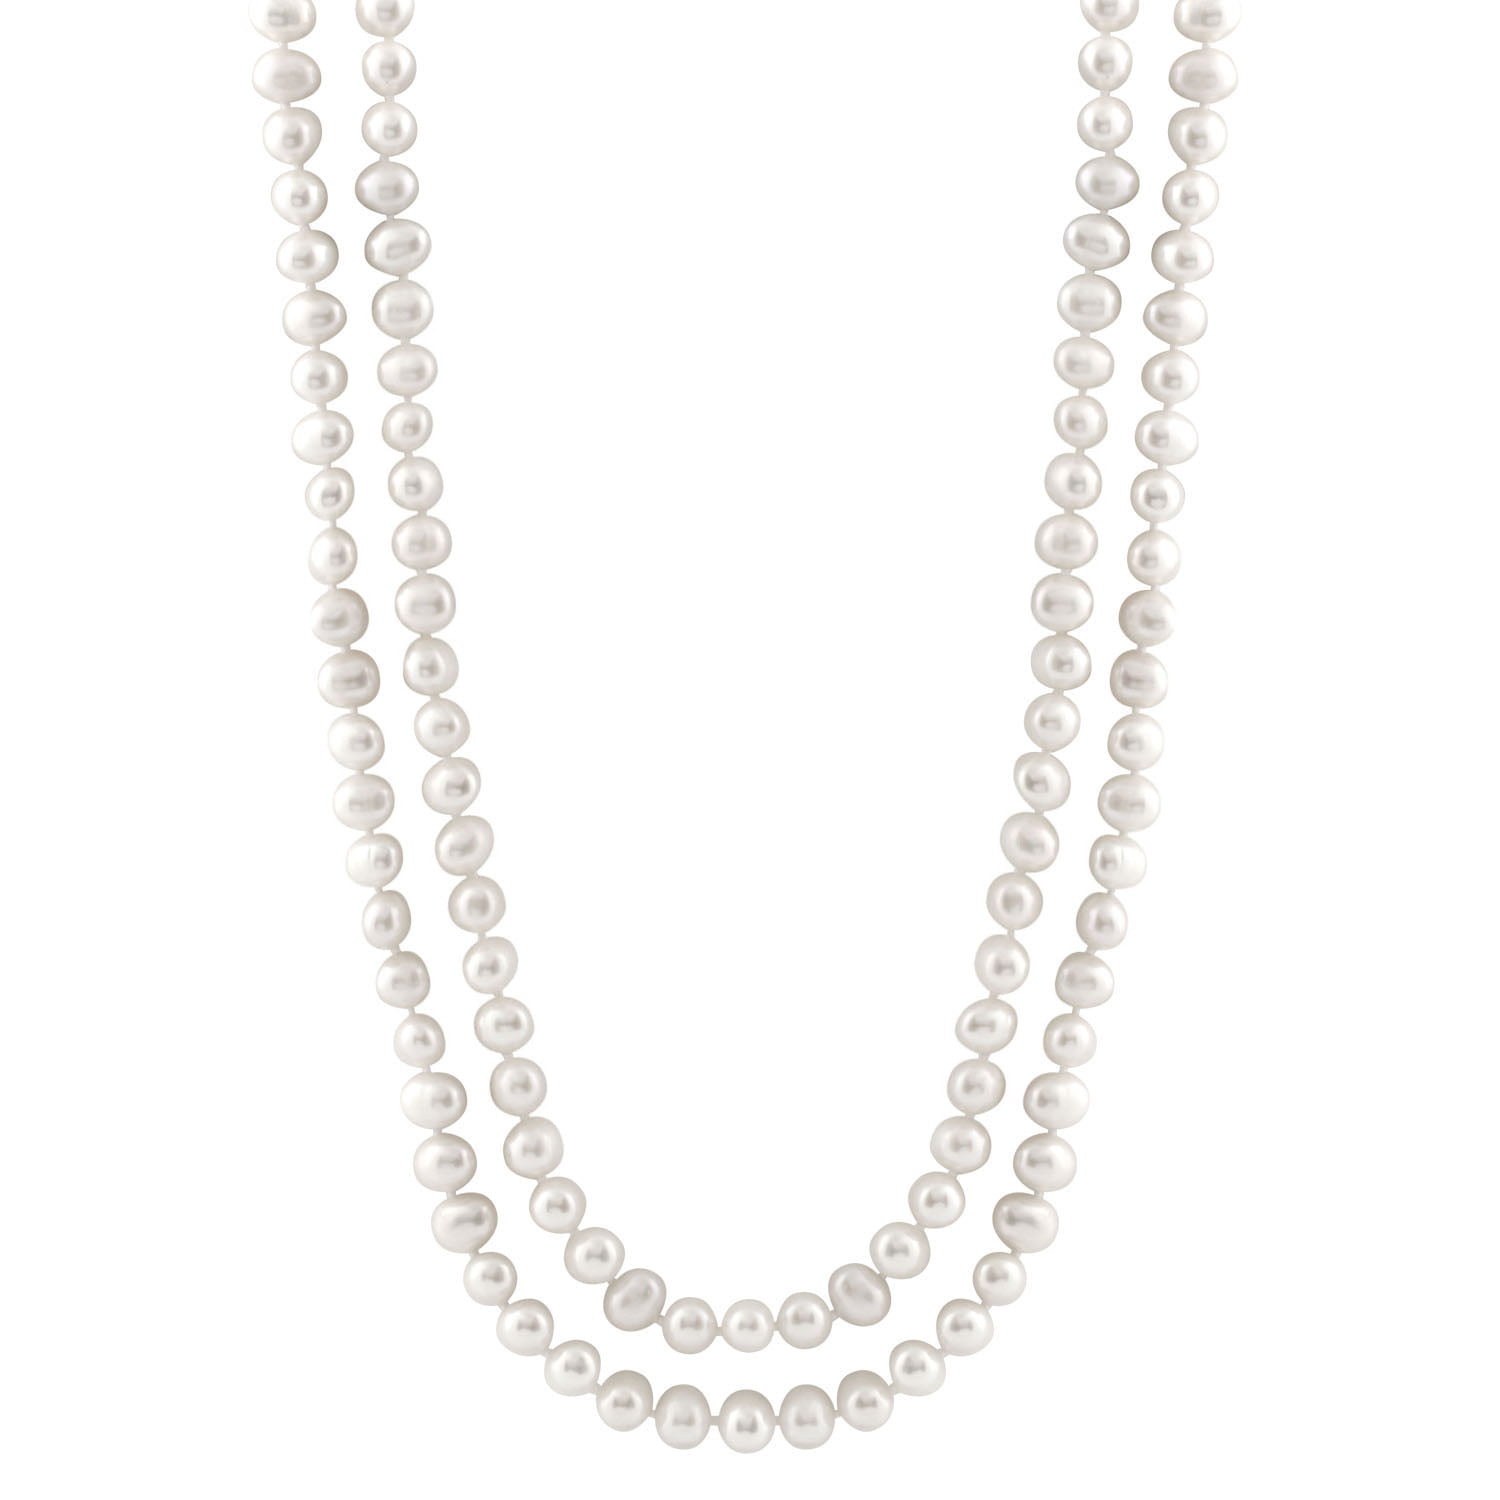 Handpicked A Quality 5-6mm White and Black Freshwater Cultured Pearl Strand Endless 64 Necklace 